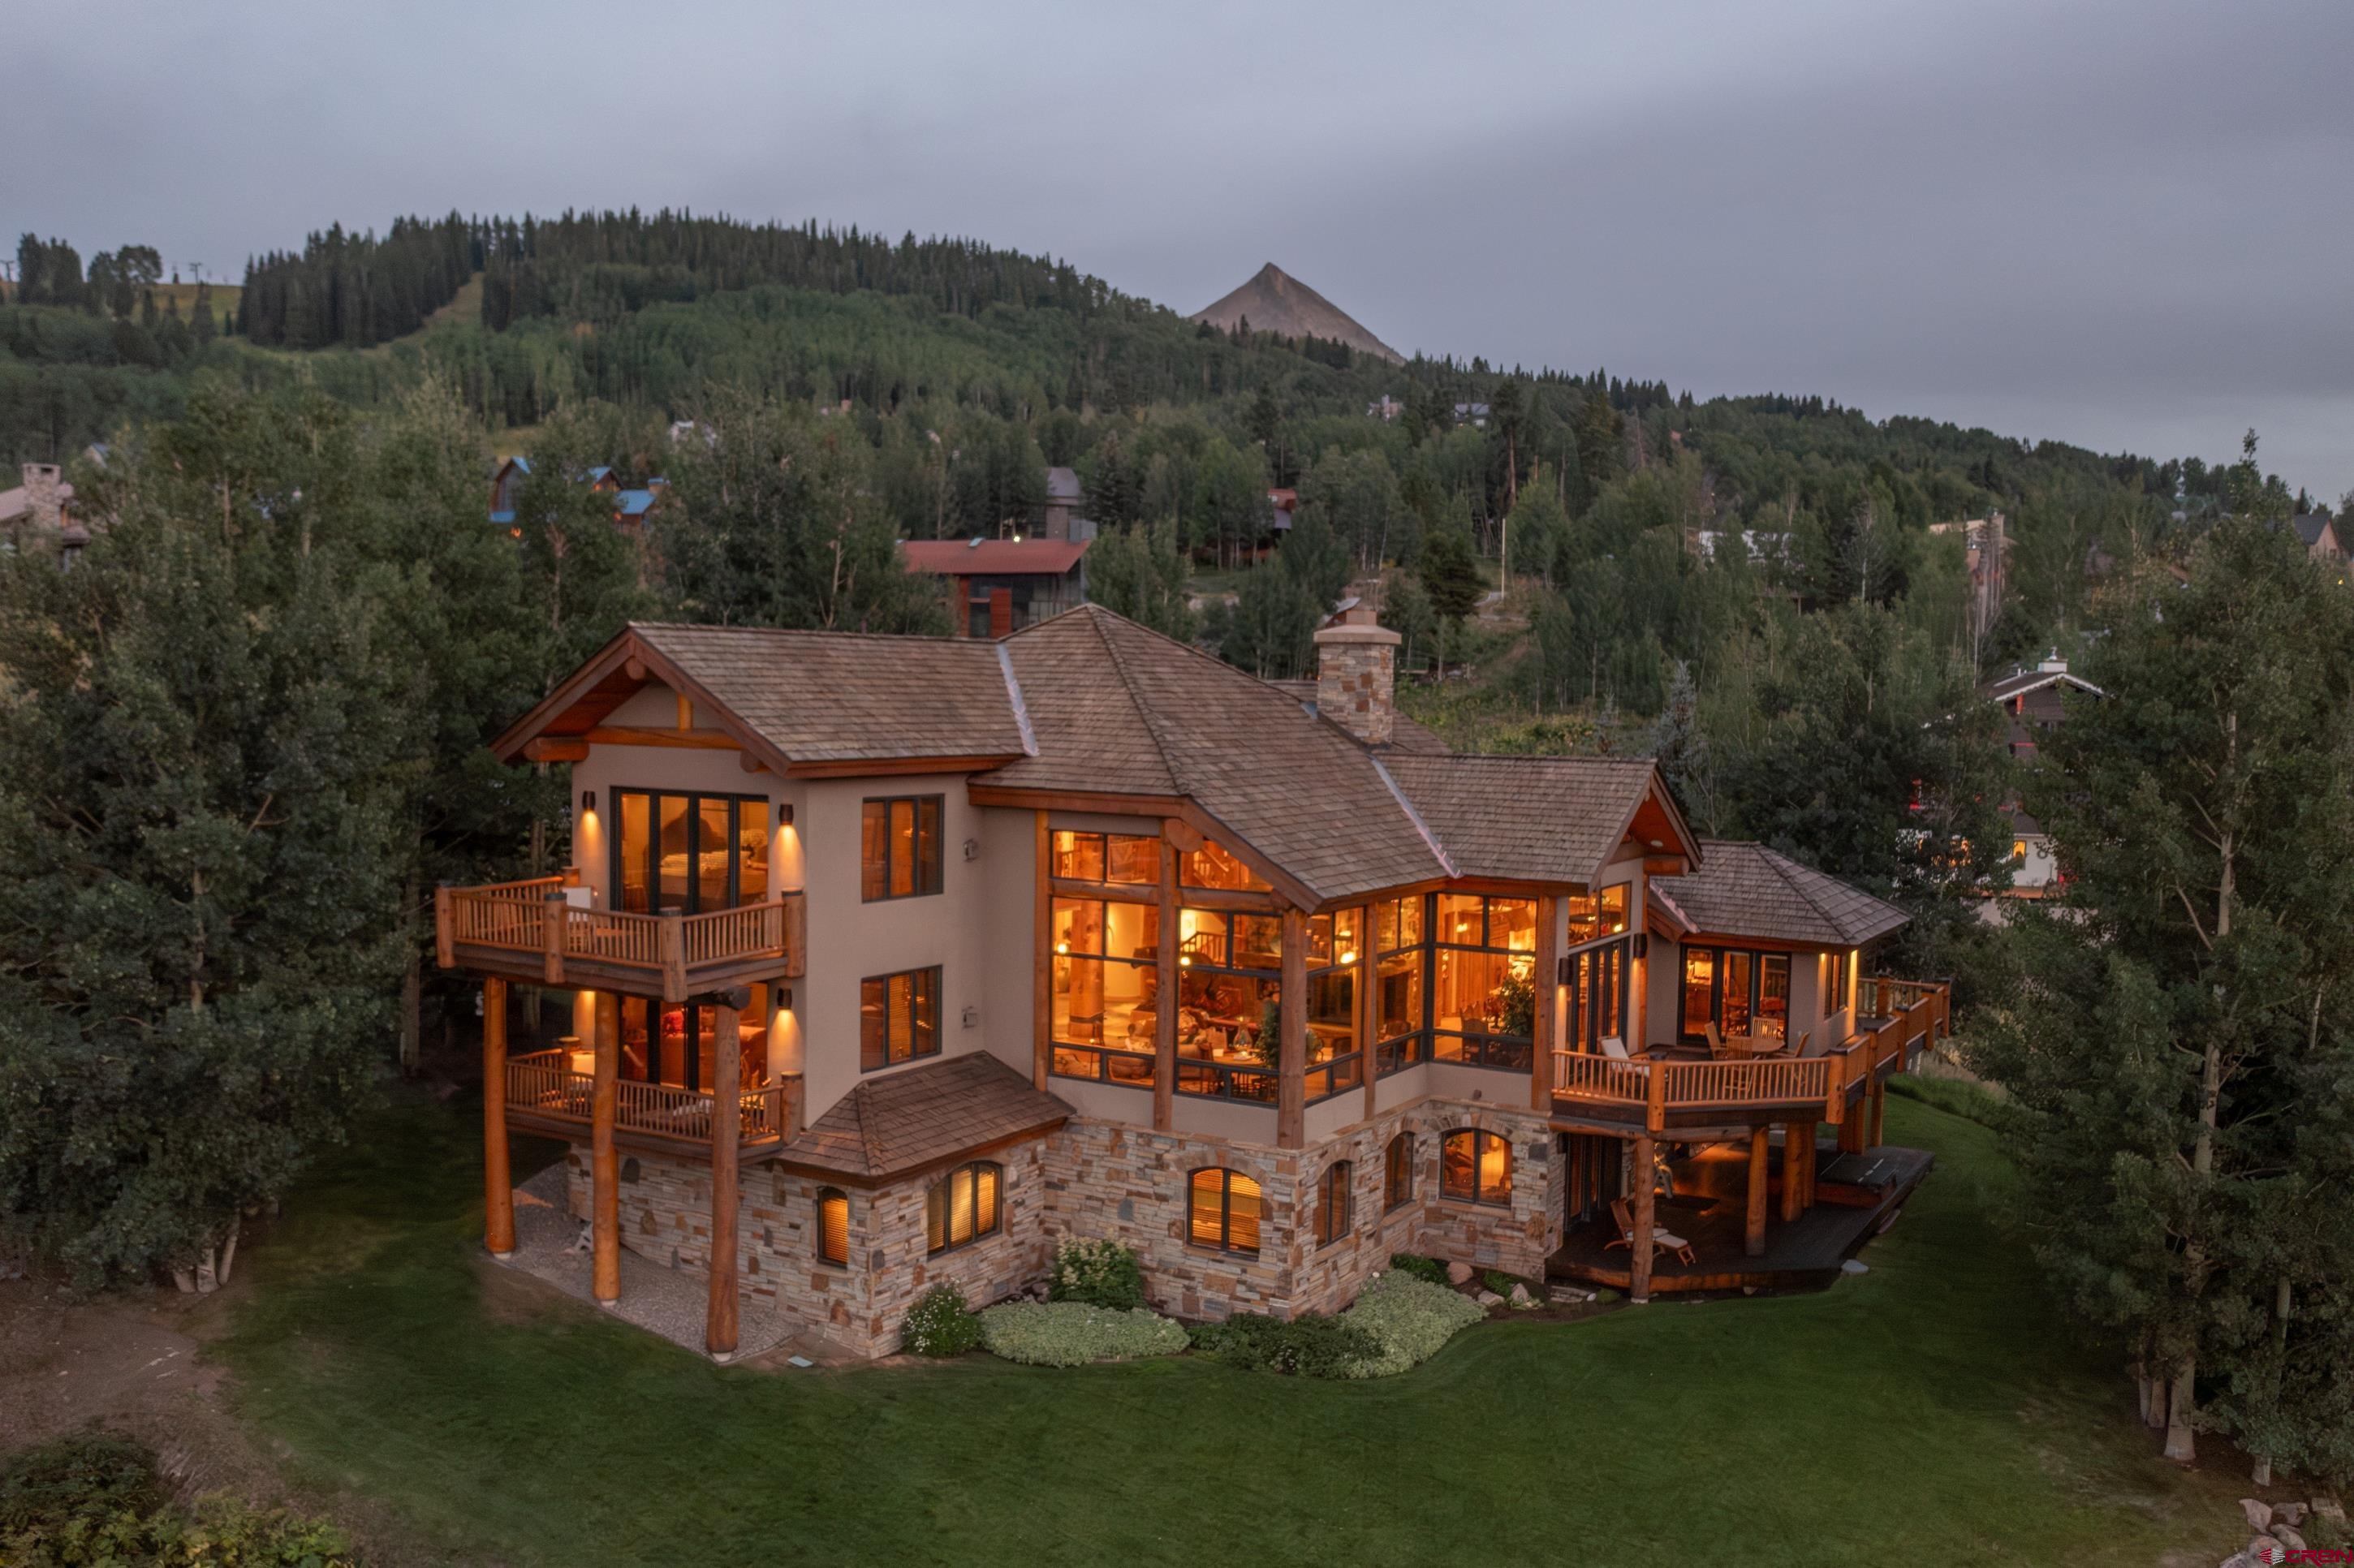 42 Gold Link Drive, Mt. Crested Butte, CO 